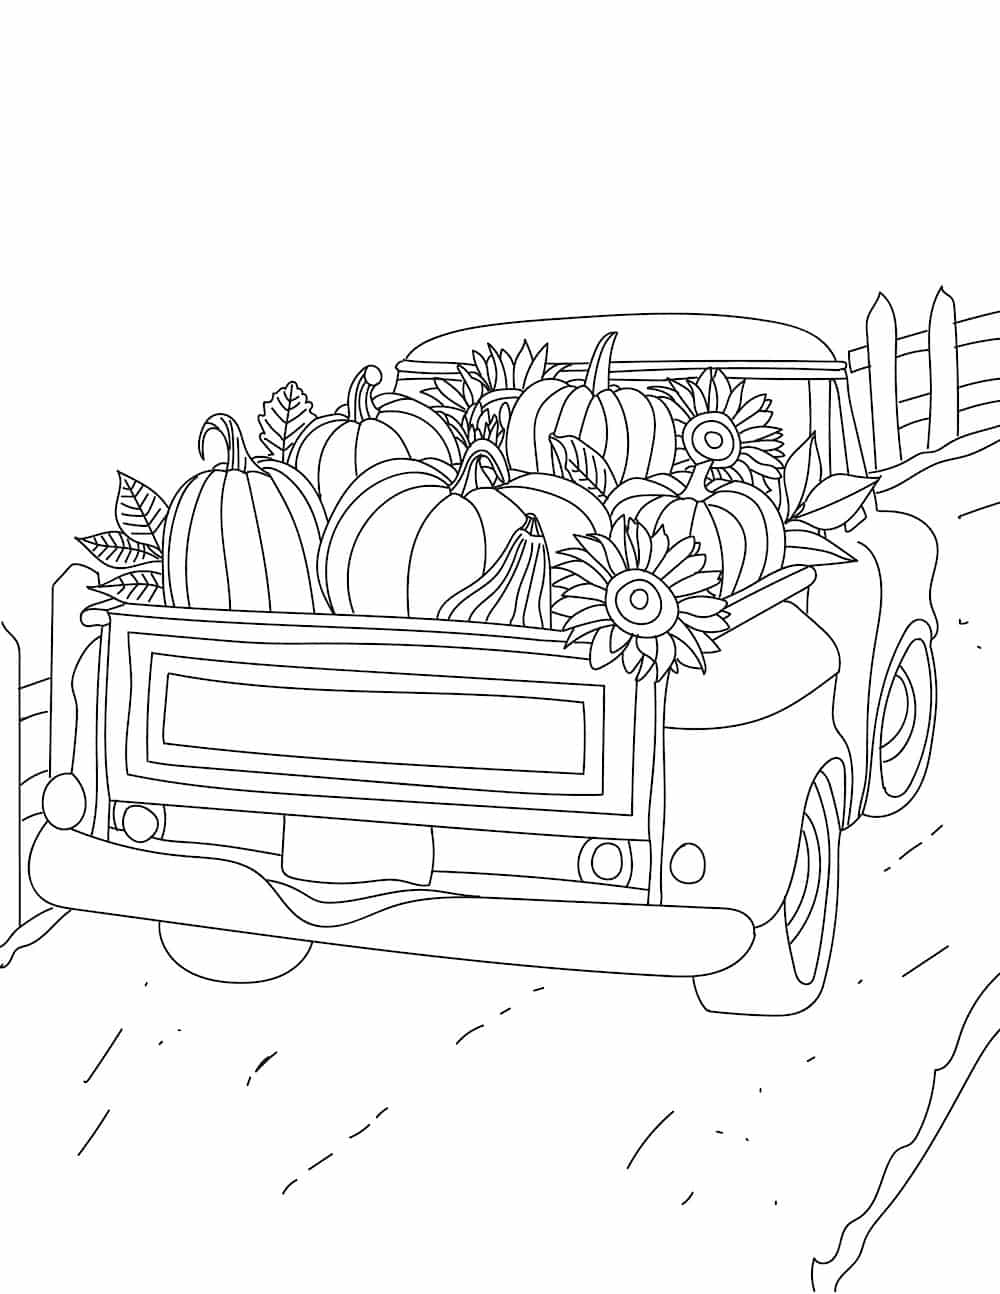 3 Printable Easy Fall Coloring Pages ...